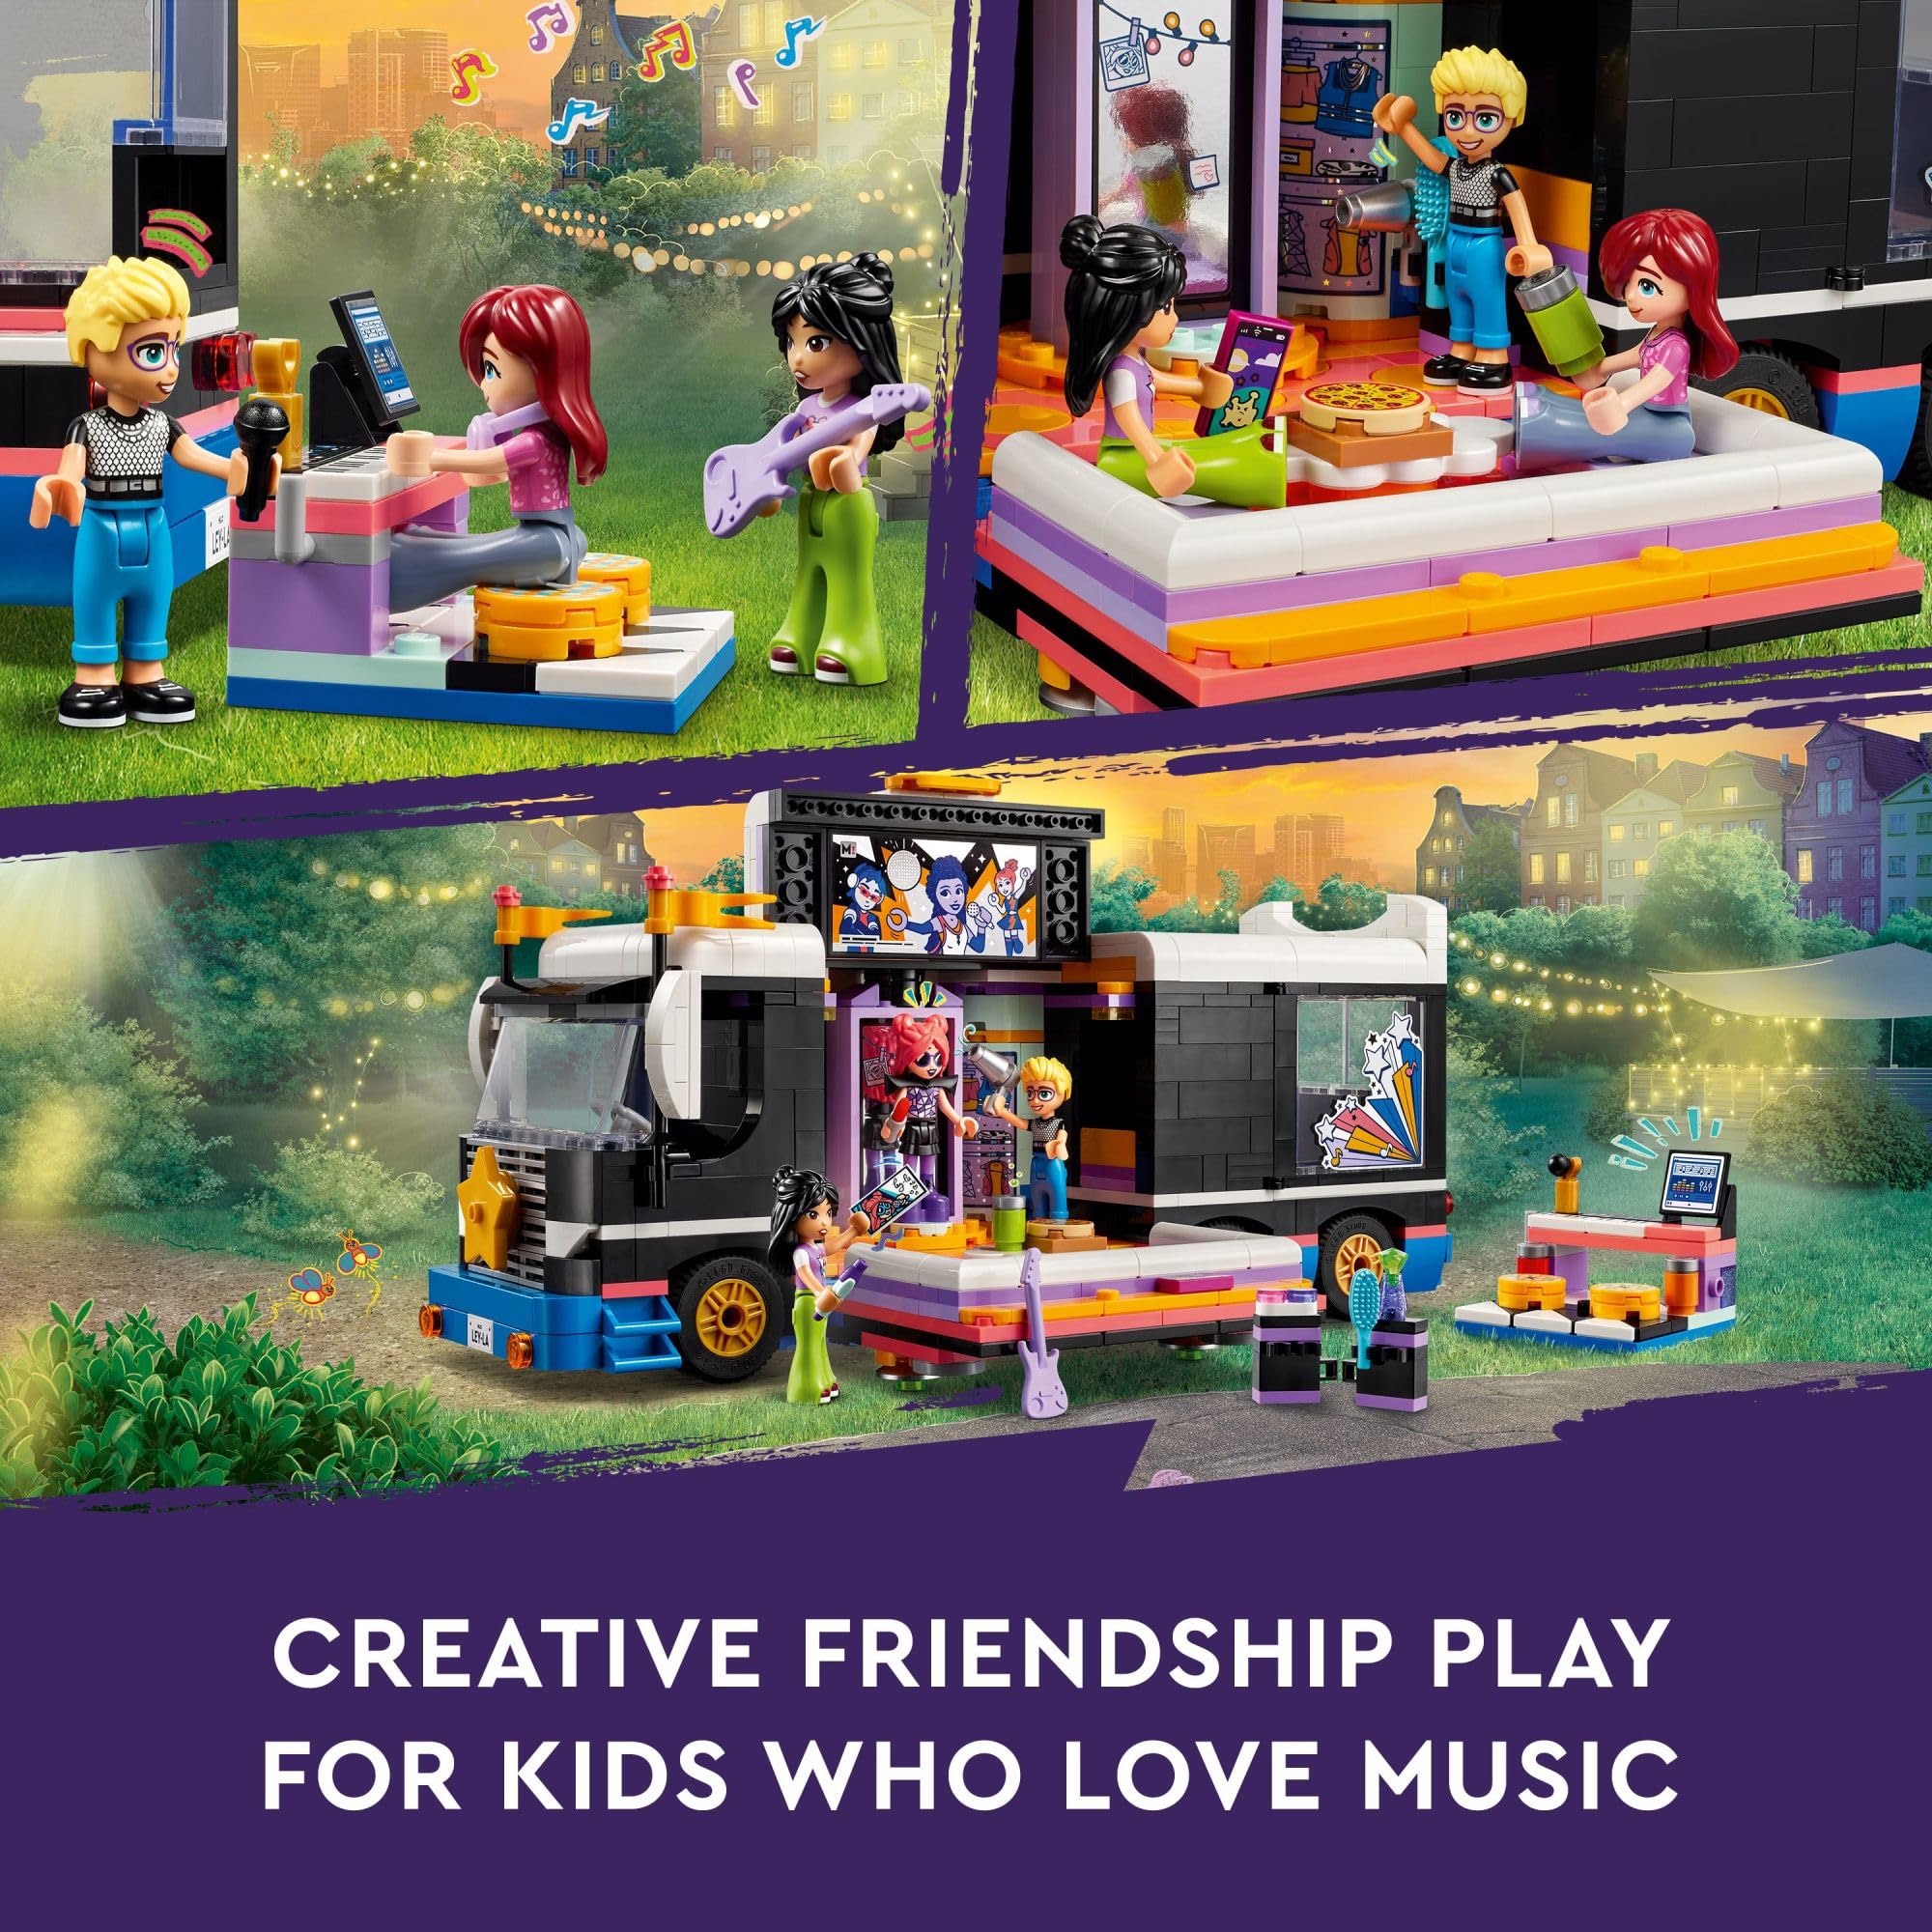 LEGO Friends Pop Star Music Tour Bus Play Together​ Toy, Social-Emotional Musical Toy with 4 Mini-Doll Characters, Toy Truck Building Kit, Music Gift for 8 Year Old Kids, Girls and Boys, 42619